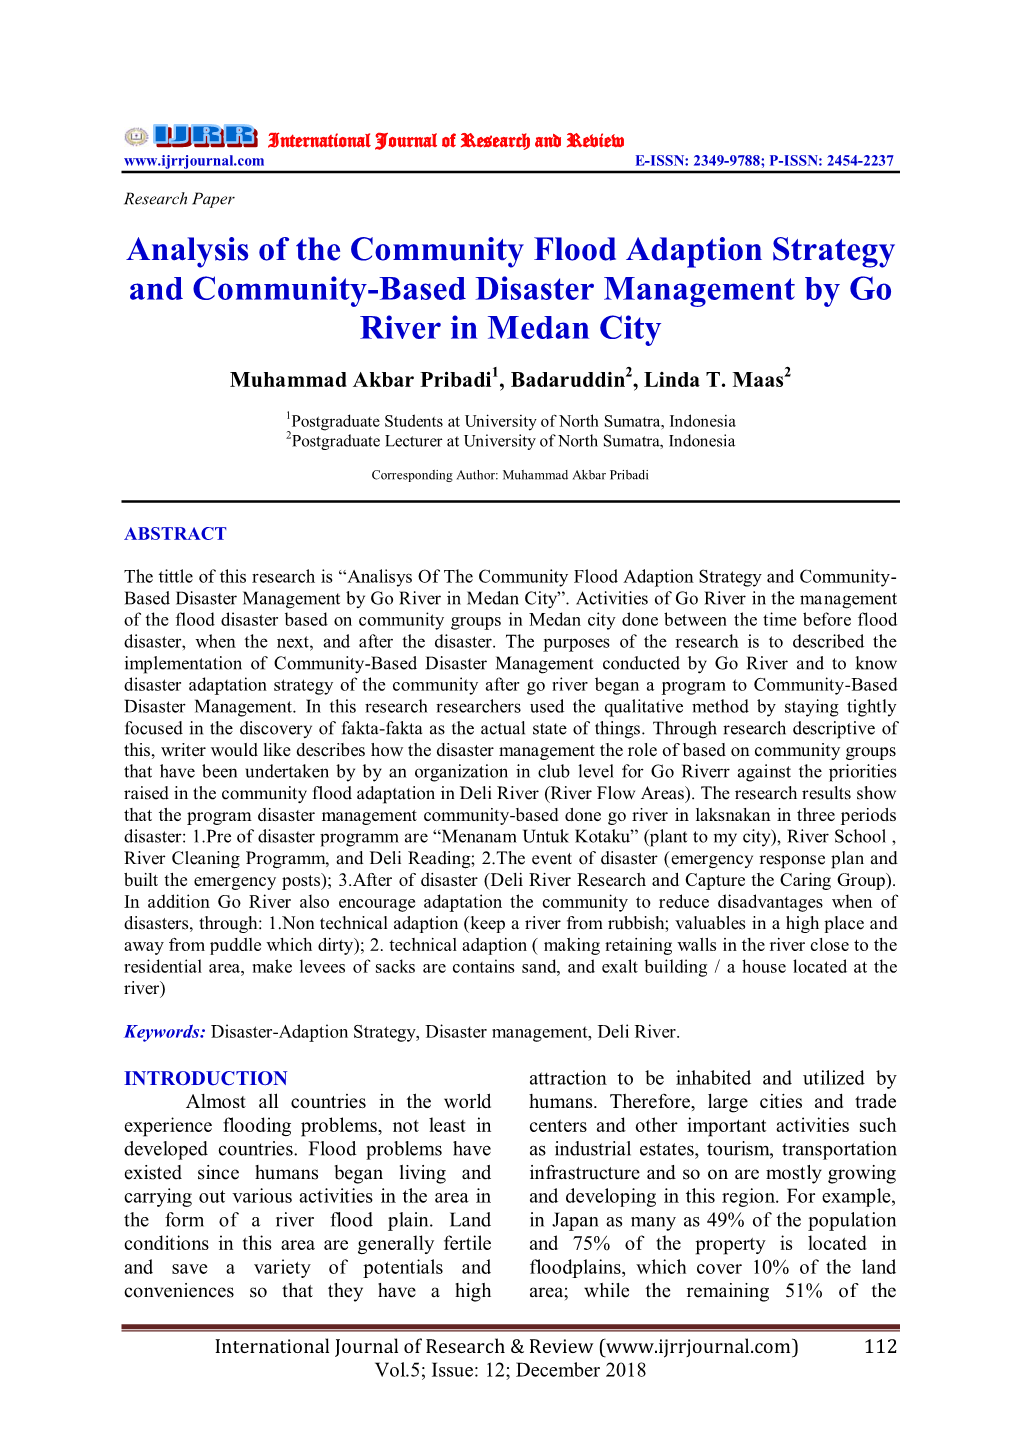 Analysis of the Community Flood Adaption Strategy and Community-Based Disaster Management by Go River in Medan City